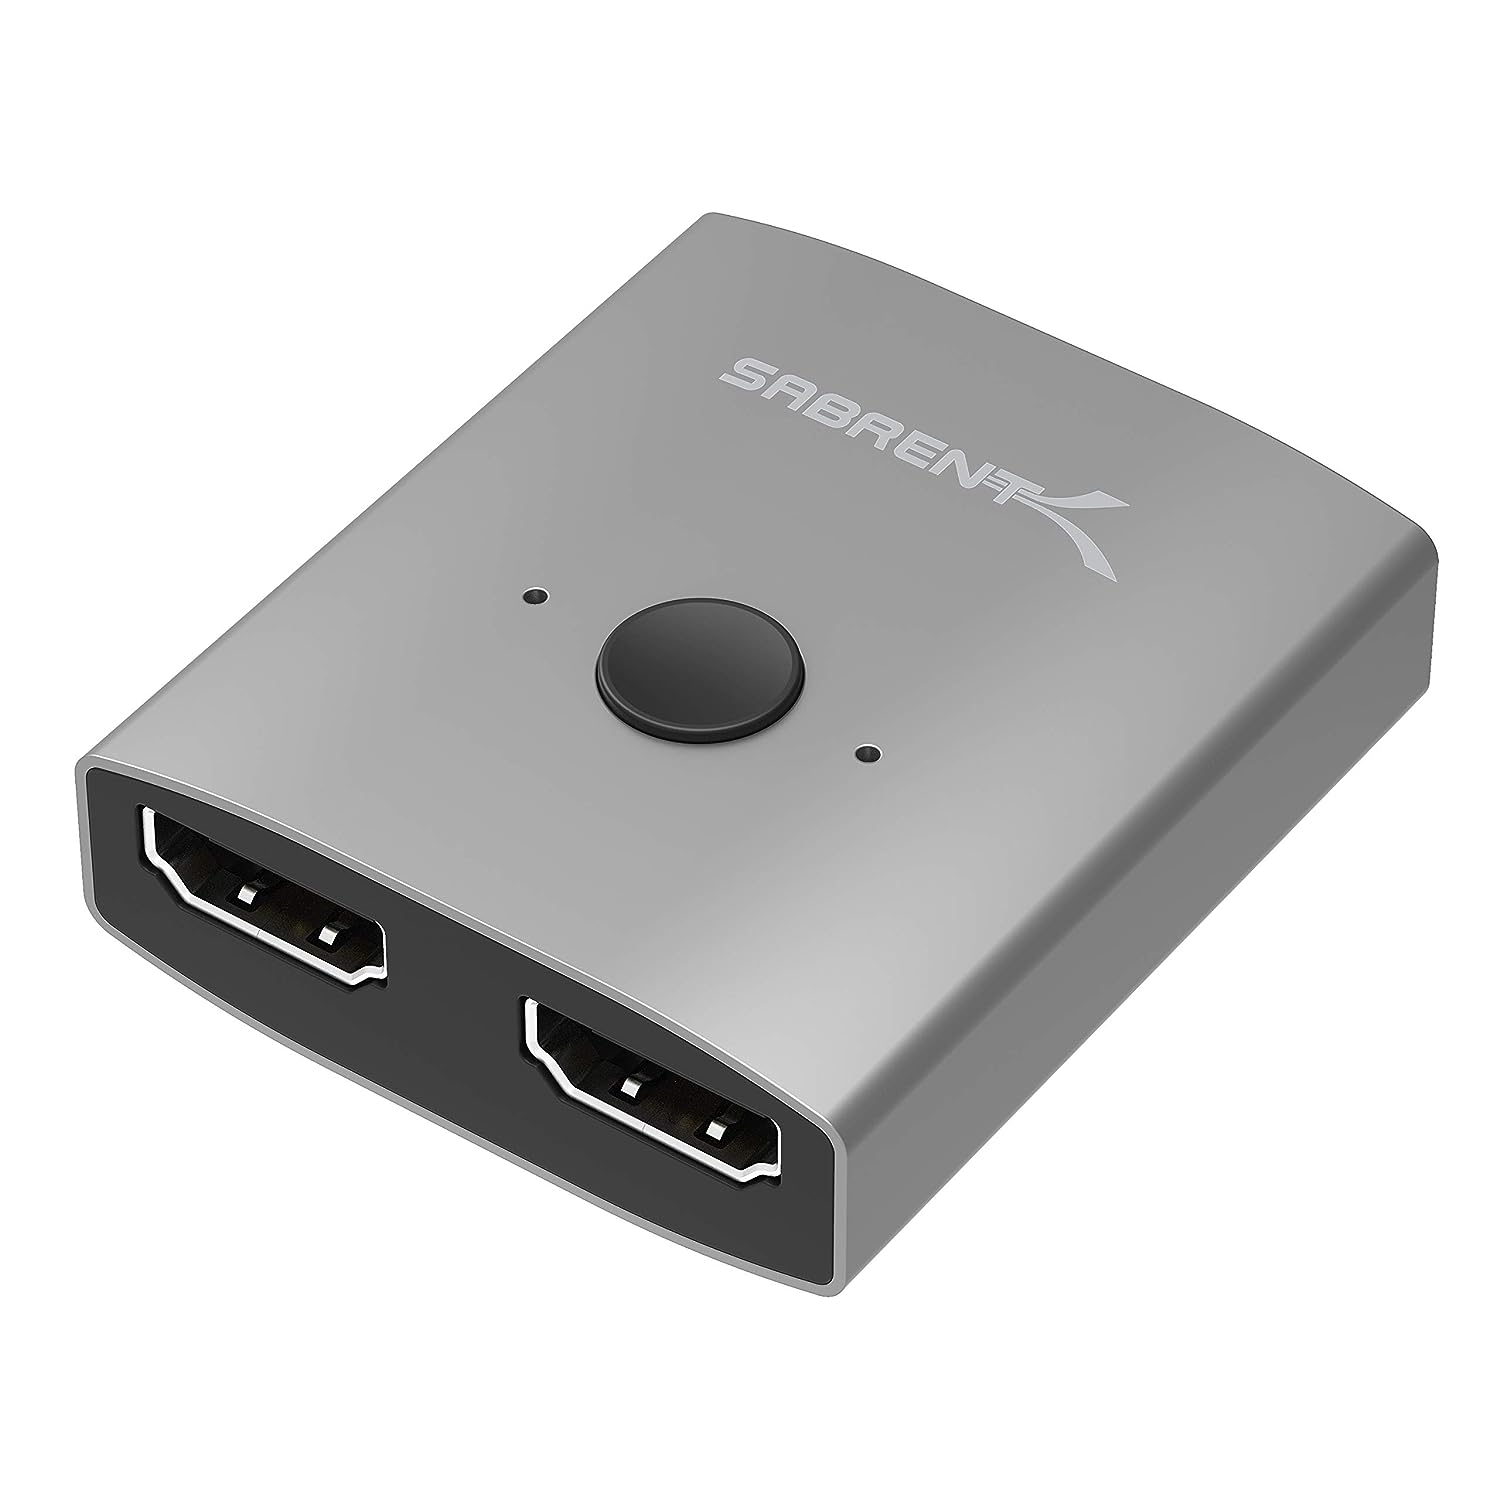 SABRENT 2 Input 1 Output 4K, 2K, and 3D Support Dual HDMI 2 Port Aluminum Sharing Switch, Supports HD for Xbox PS5/4/3/ Roku or HDTV Fire Stick (DA-HSW2)